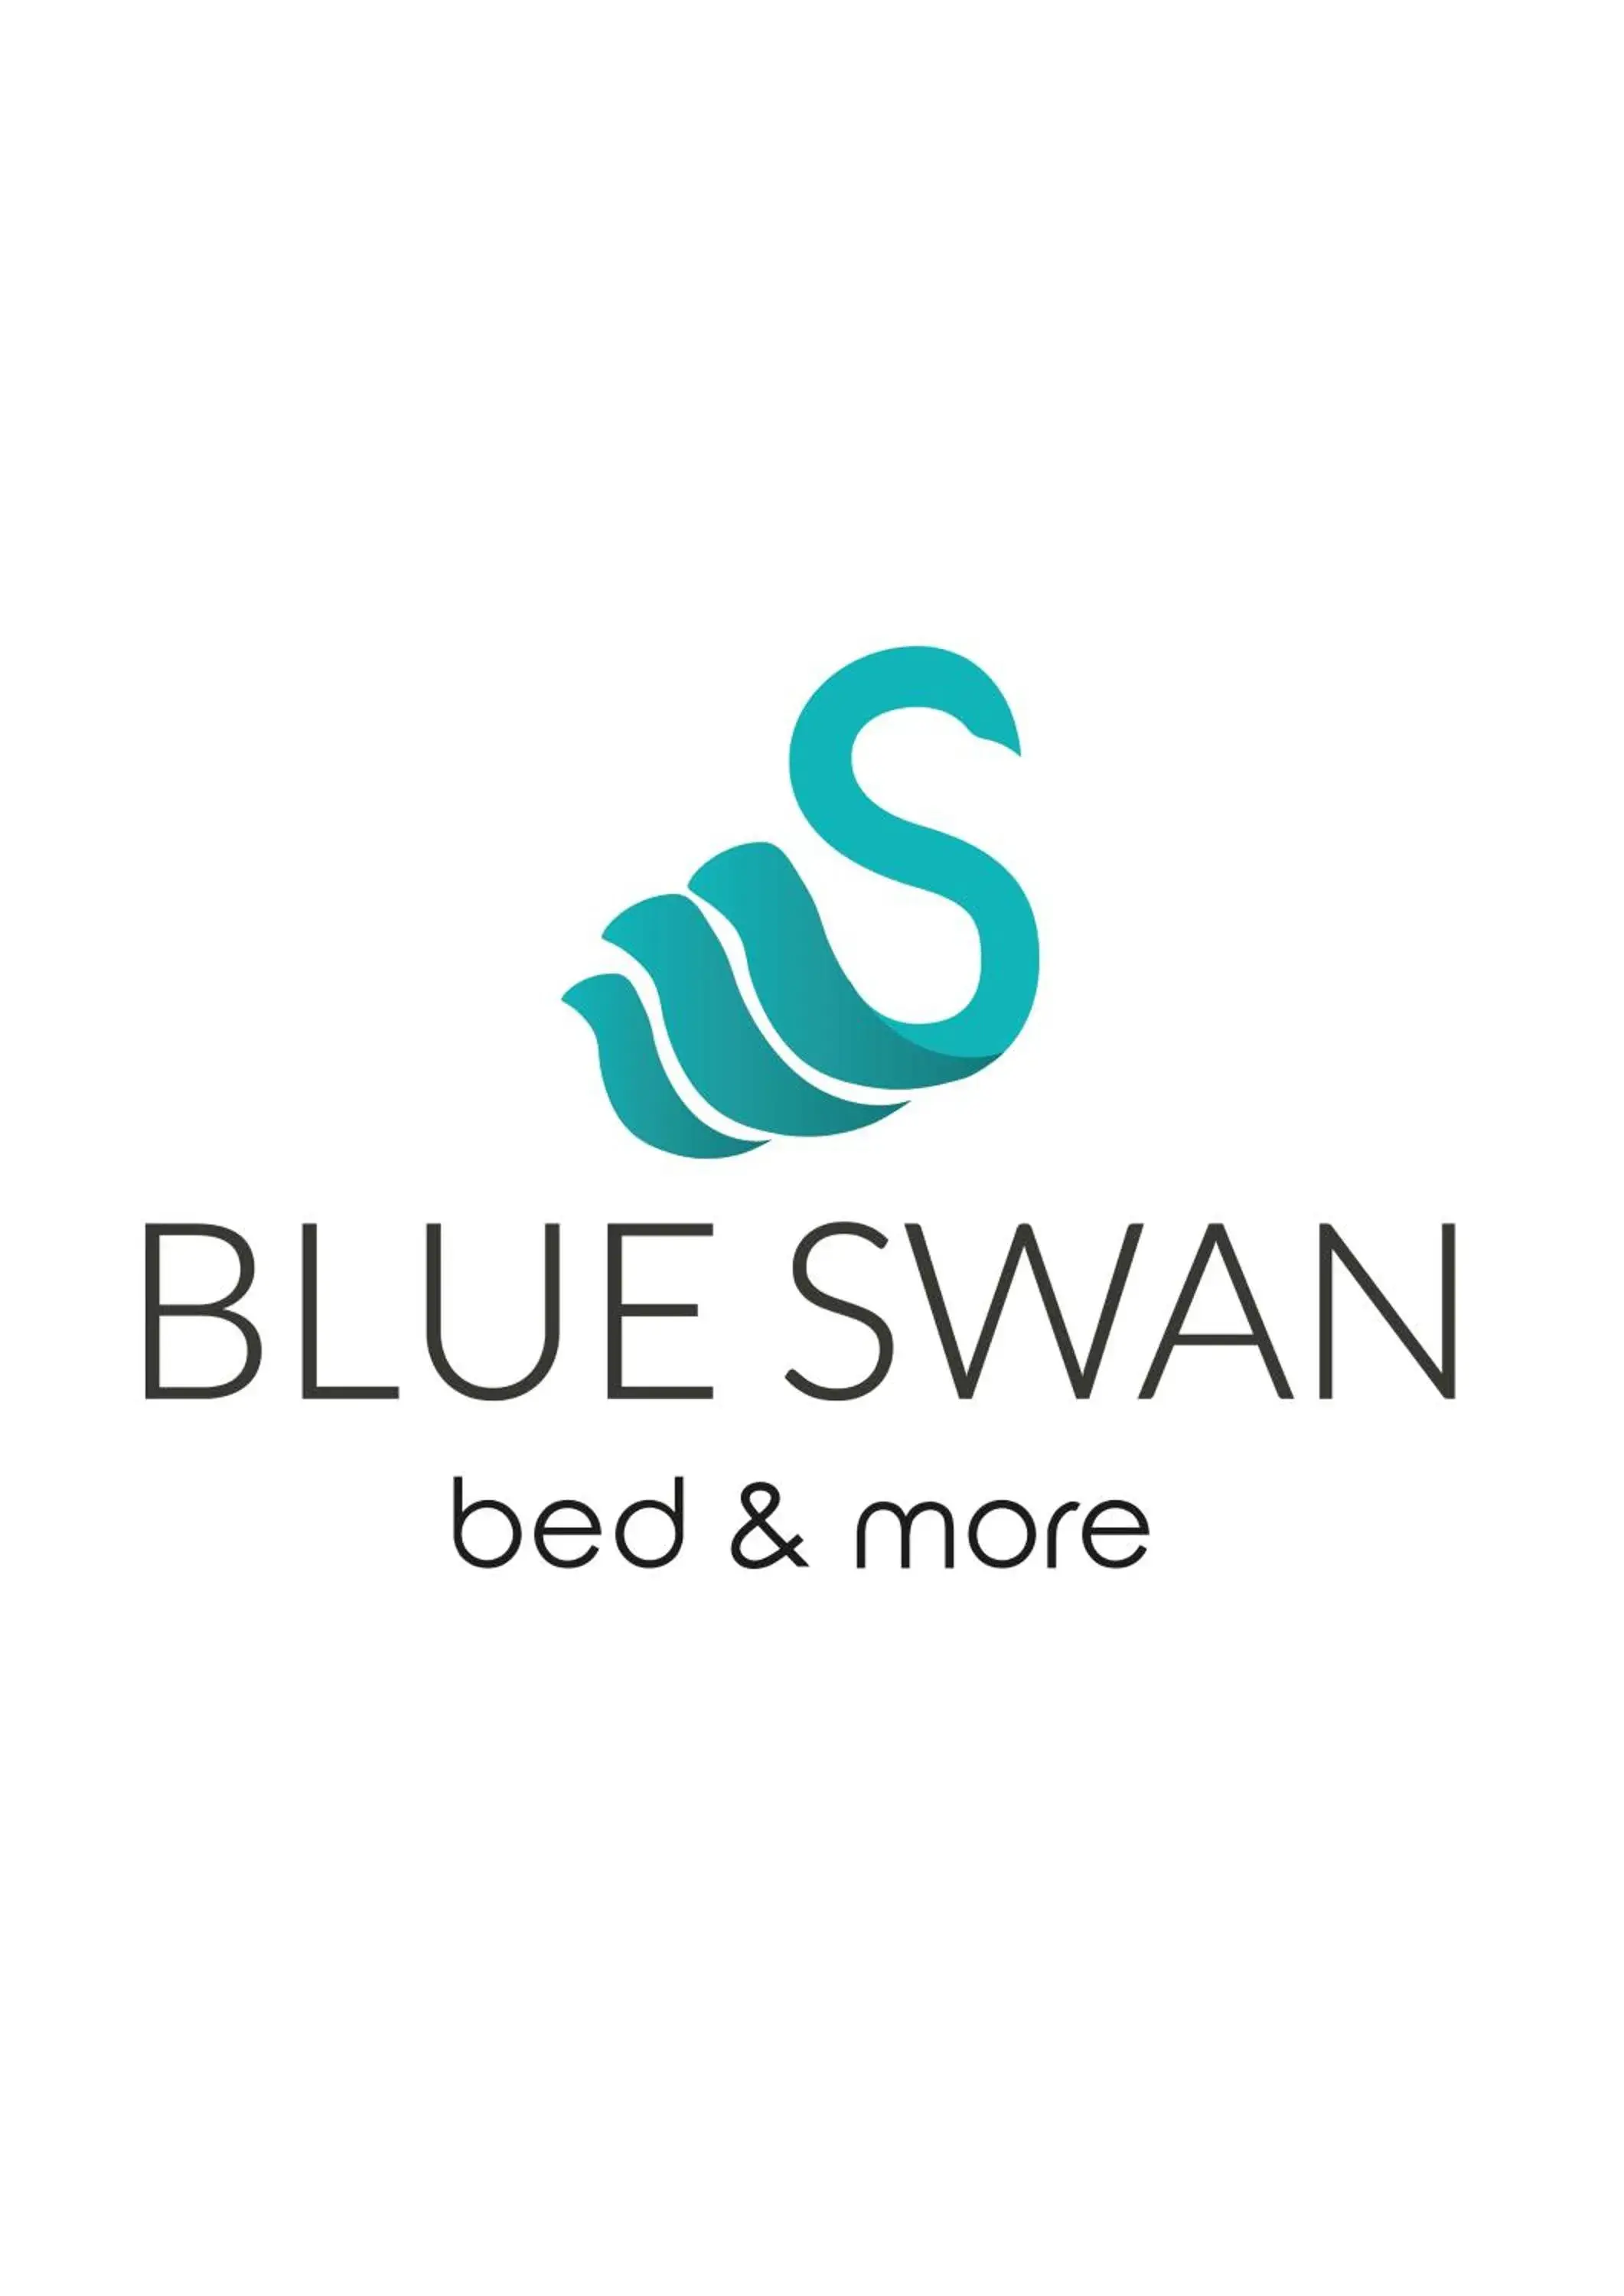 Property logo or sign in Blue Swan